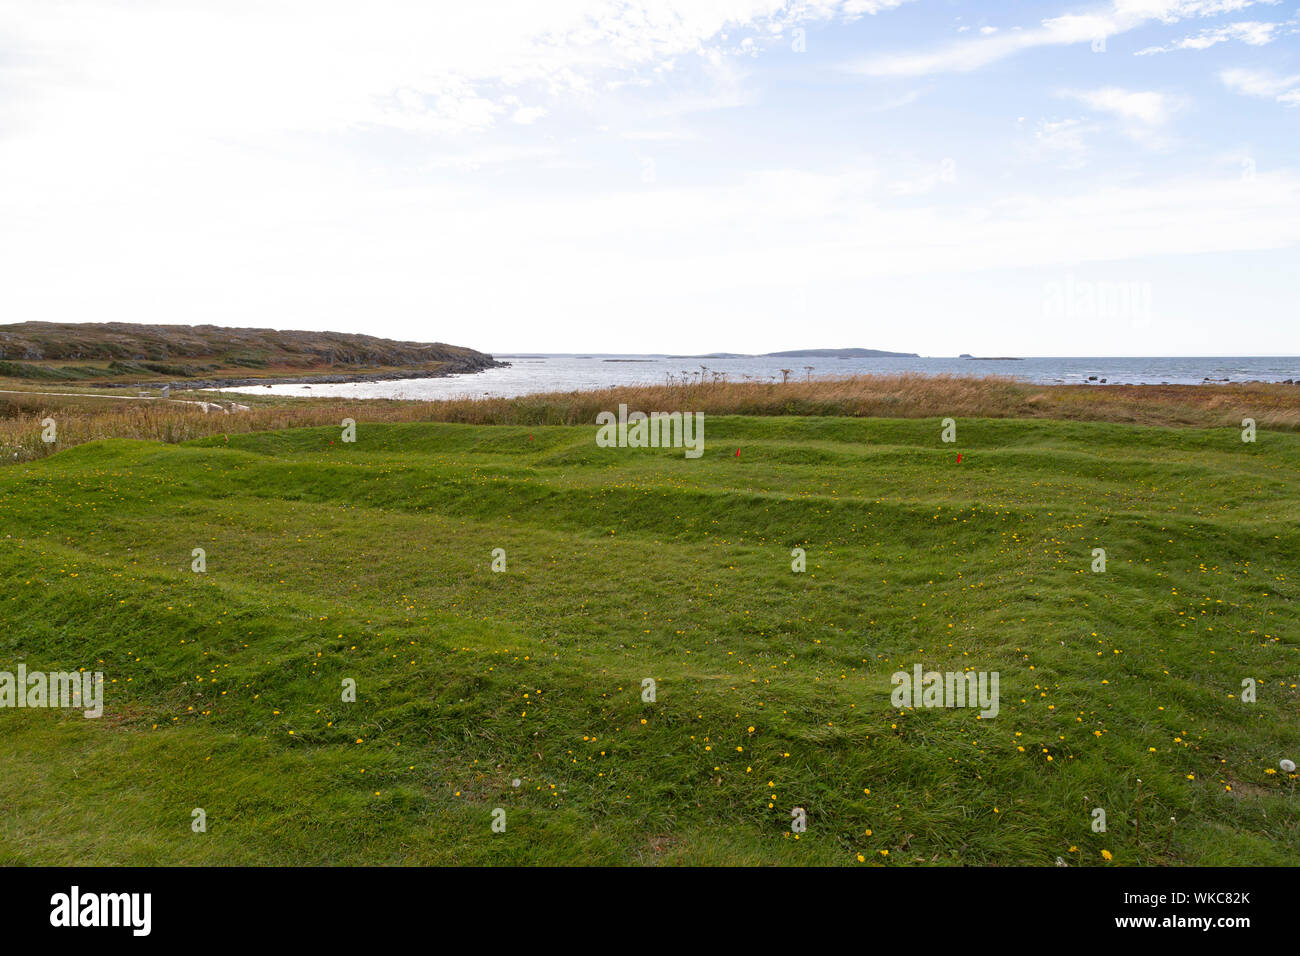 The outline of Norse buildings at L'Anse aux Meadows in Newfoundland and Labrador, Canada. Stock Photo